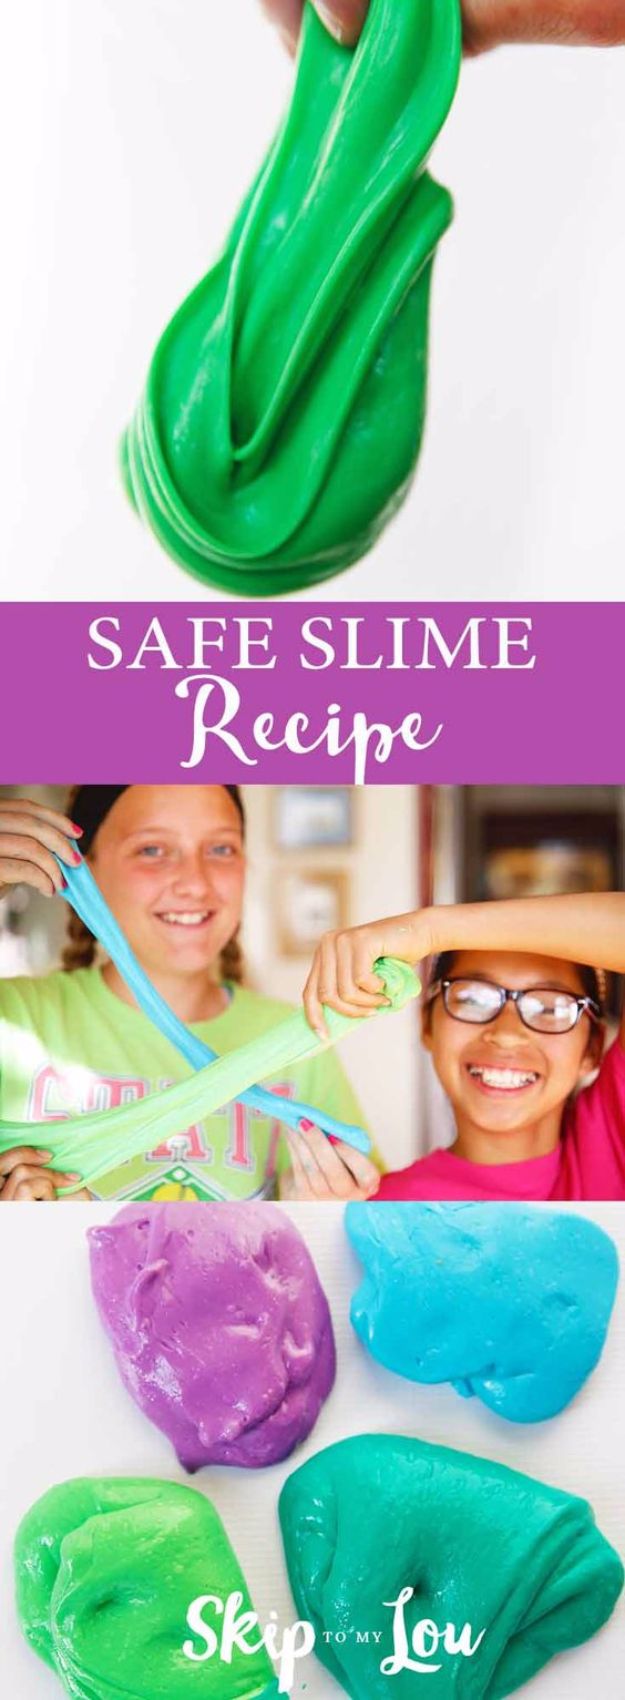 Borax Free Slime Recipes - Easy Safe Slime - Safe Slimes To Make Without Glue - How To Make Fluffy Slime With Shaving Cream - Easy 3 Ingredients Glitter Slime, Clear, Galaxy, Best DIY Slime Tutorials With Step by Step Instructions #slimerecipes #slime #kidscrafts #teencrafts